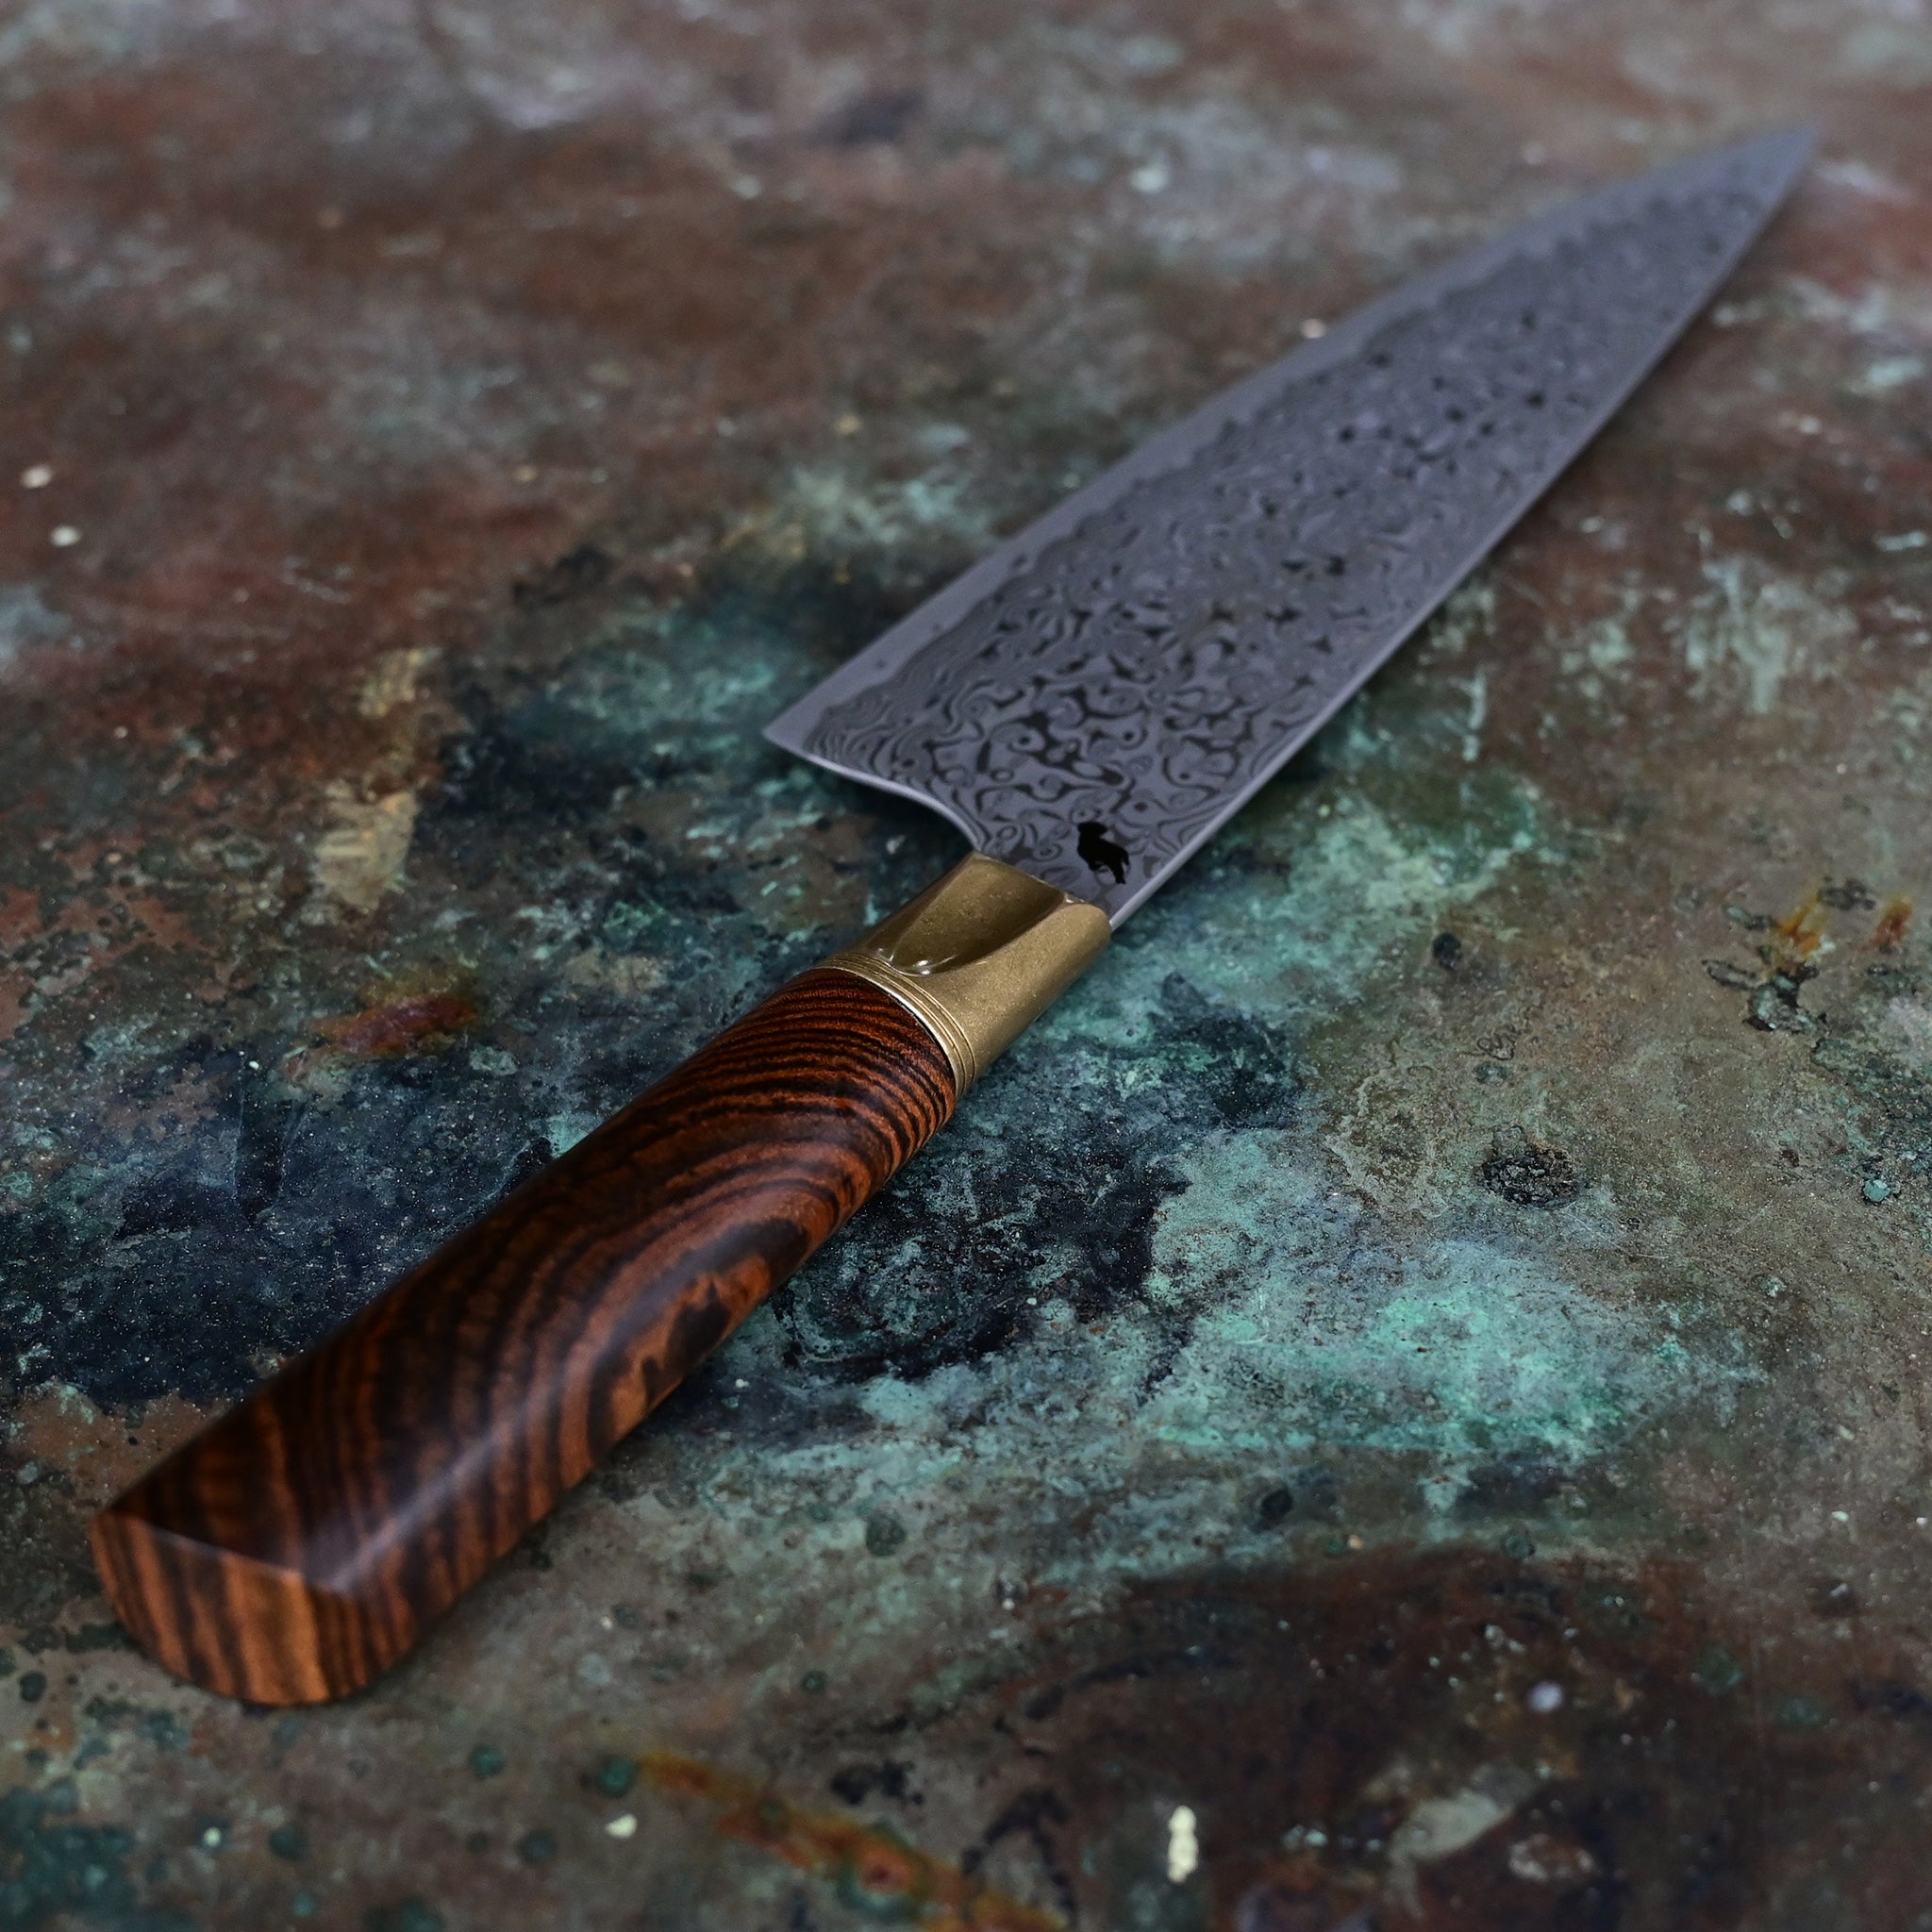 A stunning chef knife with a VG10 stainless Damascus zenith blade, aged bronze bolster, and a beautiful cross-cut Bocote wood handle displaying rings and patterns in shades of brown and tan, hand-forged by John Phillips